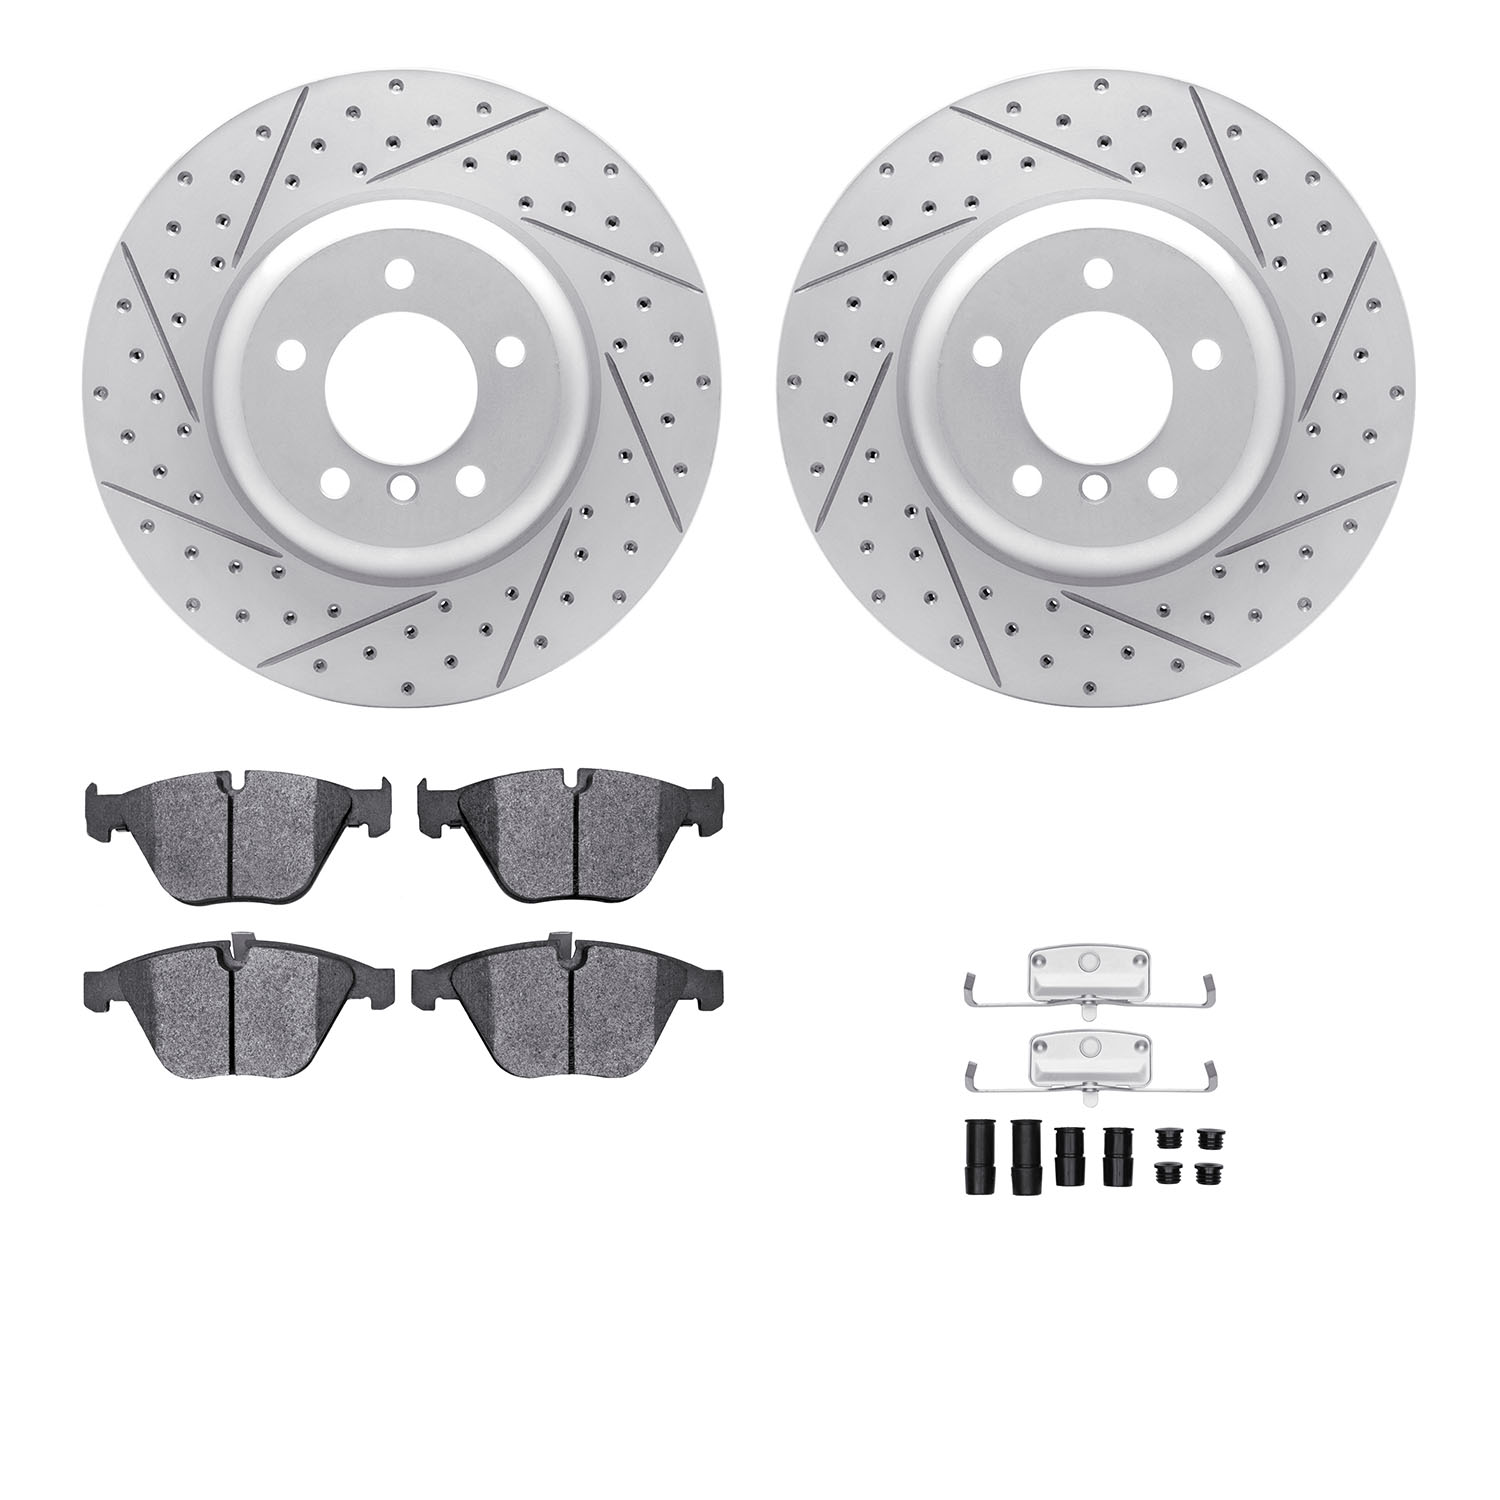 2512-31251 Geoperformance Drilled/Slotted Rotors w/5000 Advanced Brake Pads Kit & Hardware, 2004-2010 BMW, Position: Front